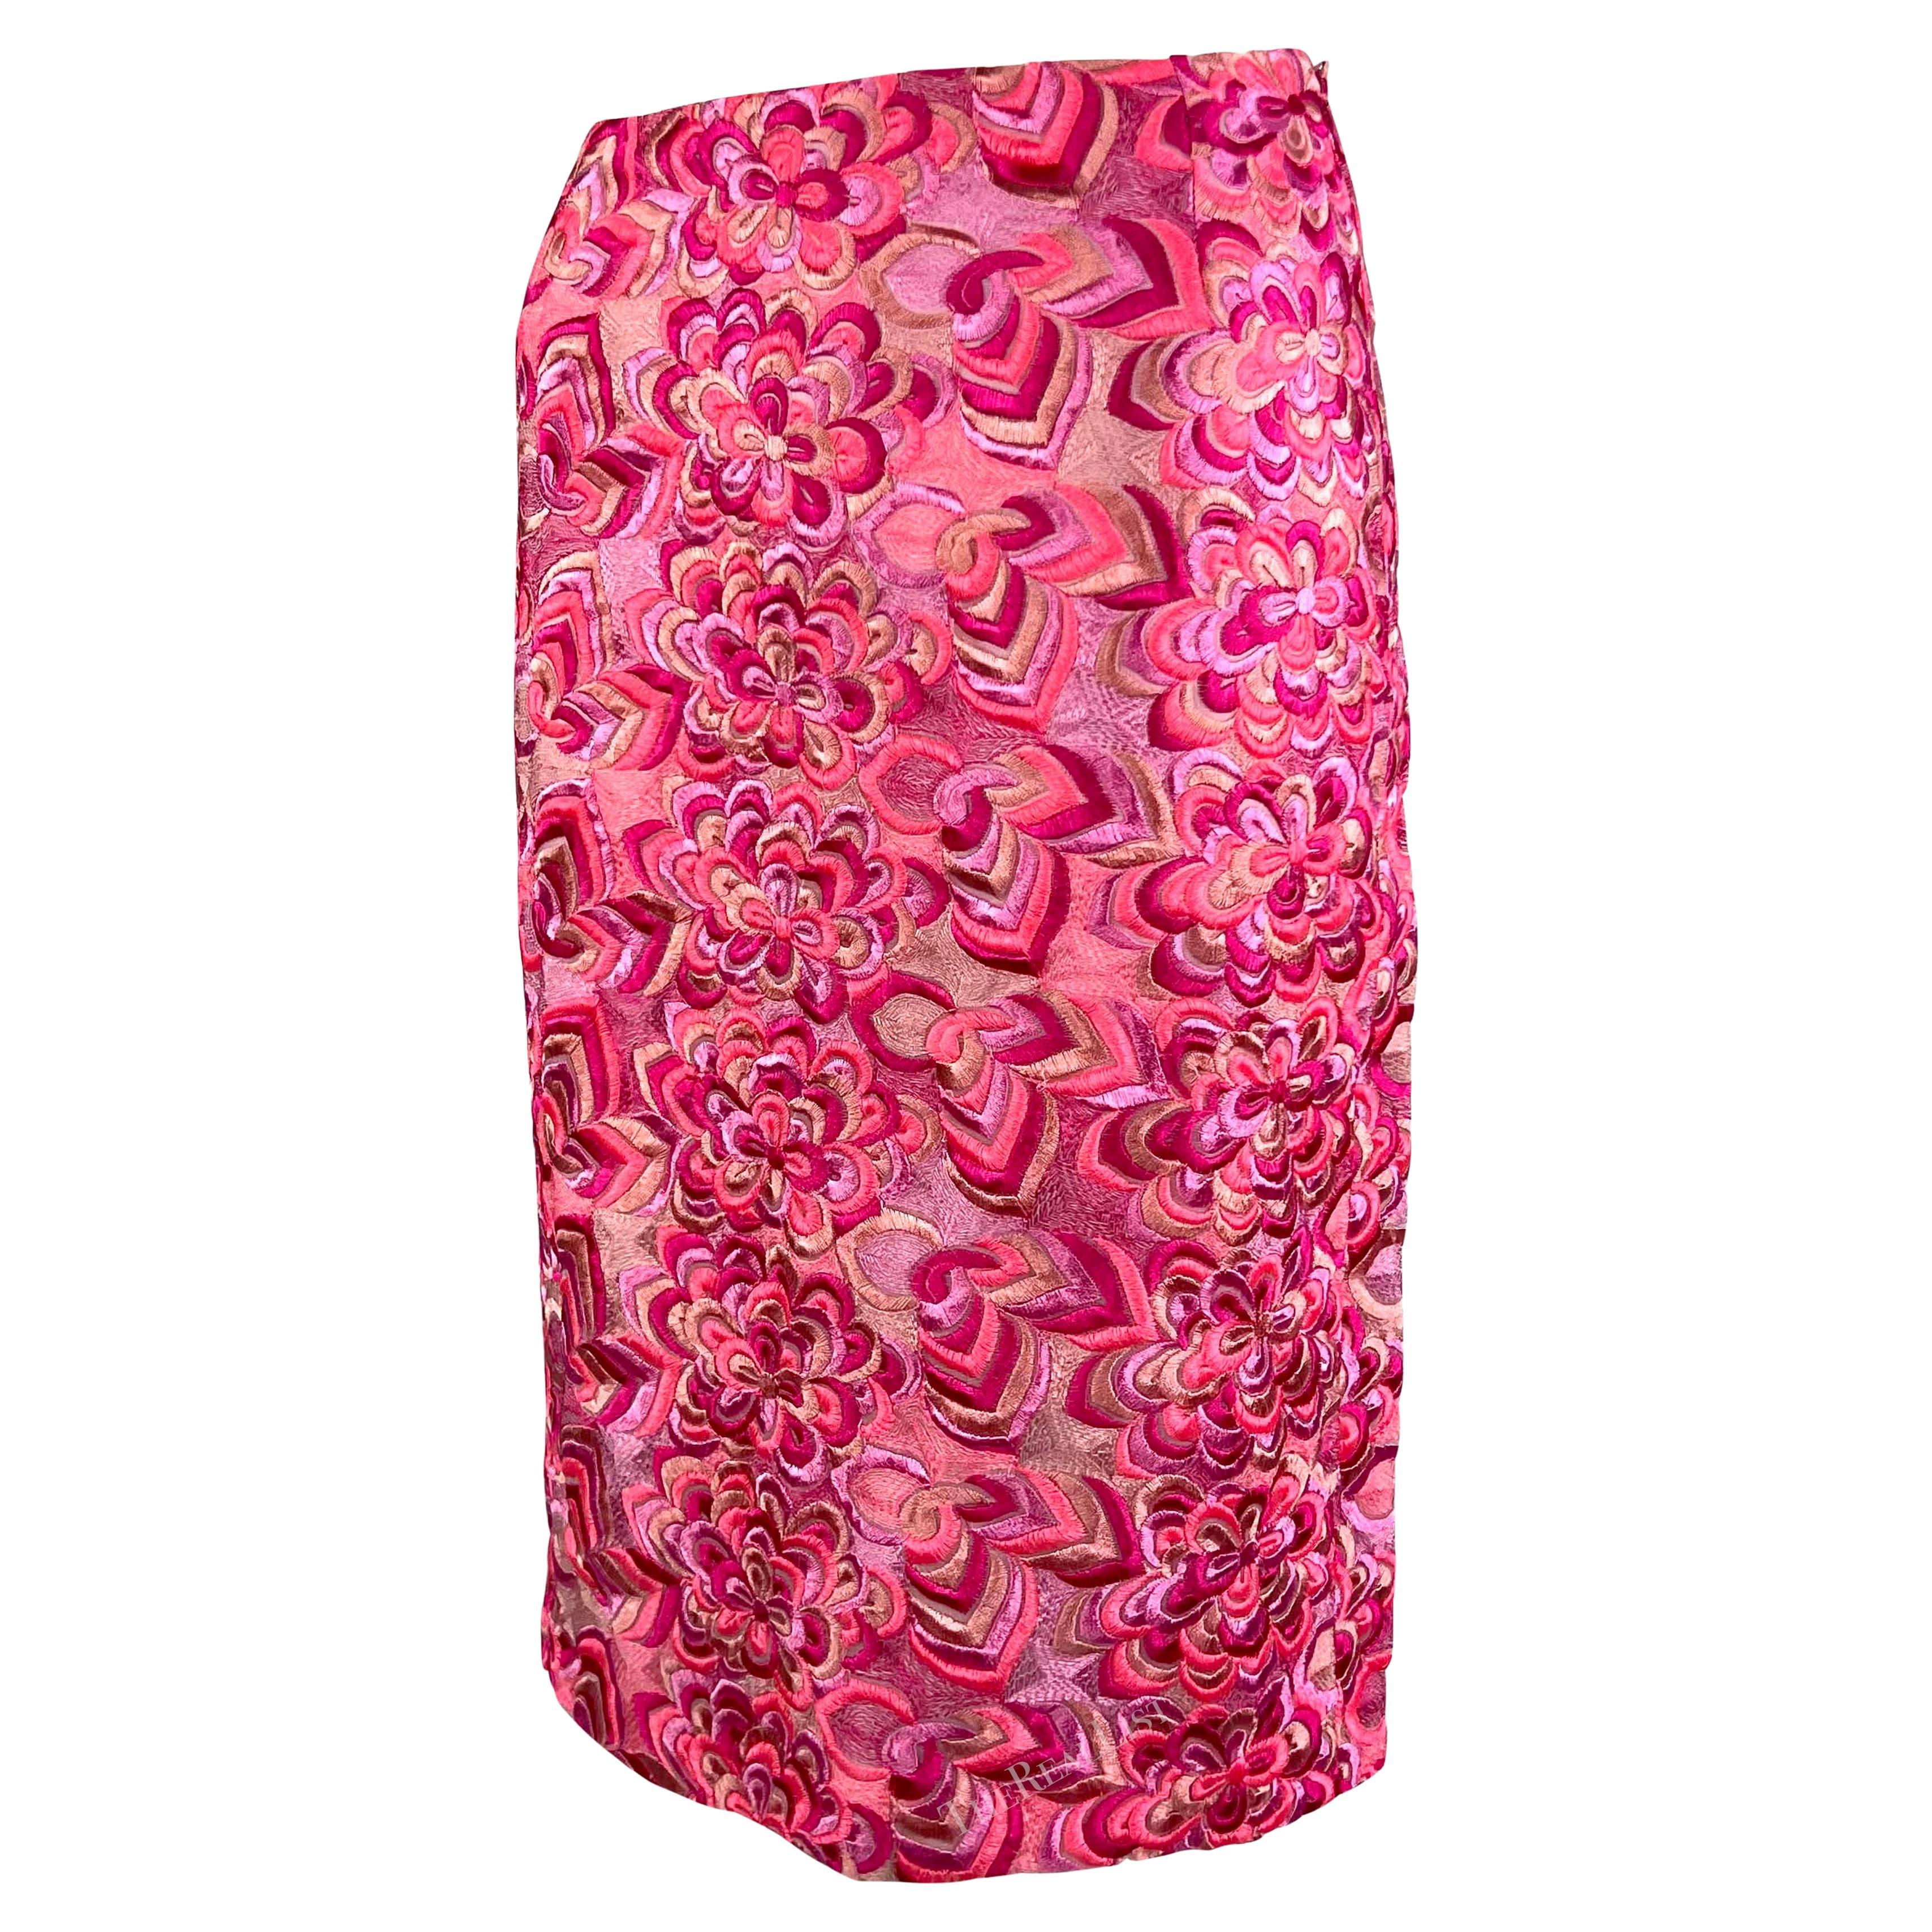 S/S 2000 Gianni Versace by Donatella Neon Pink Floral Embroidered Skirt In Excellent Condition For Sale In West Hollywood, CA